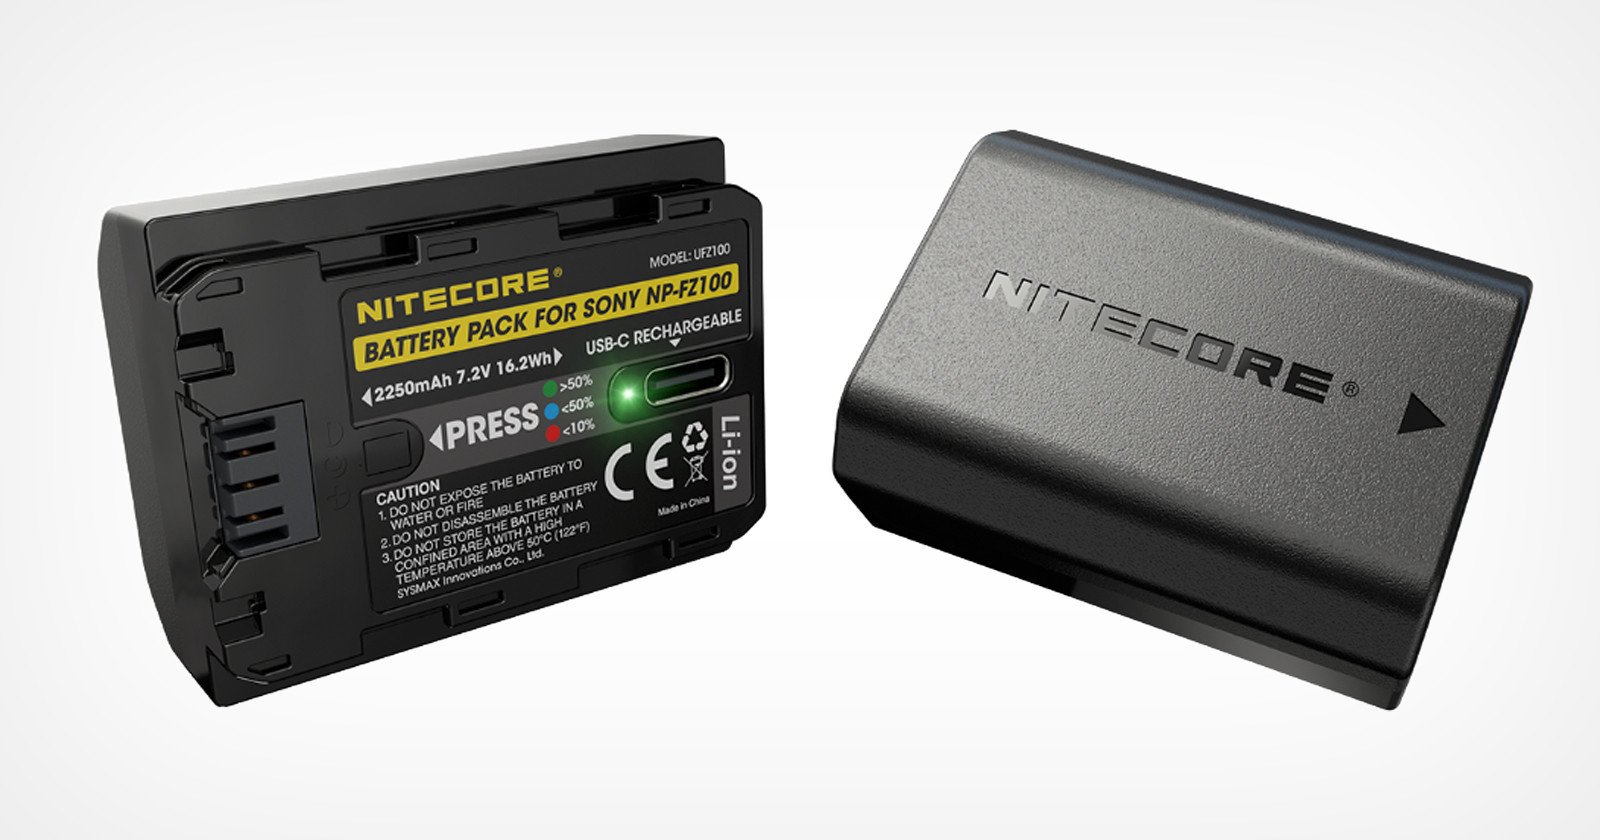 Nitecores Sony Camera Battery Charges via an Integrated USB-C Port